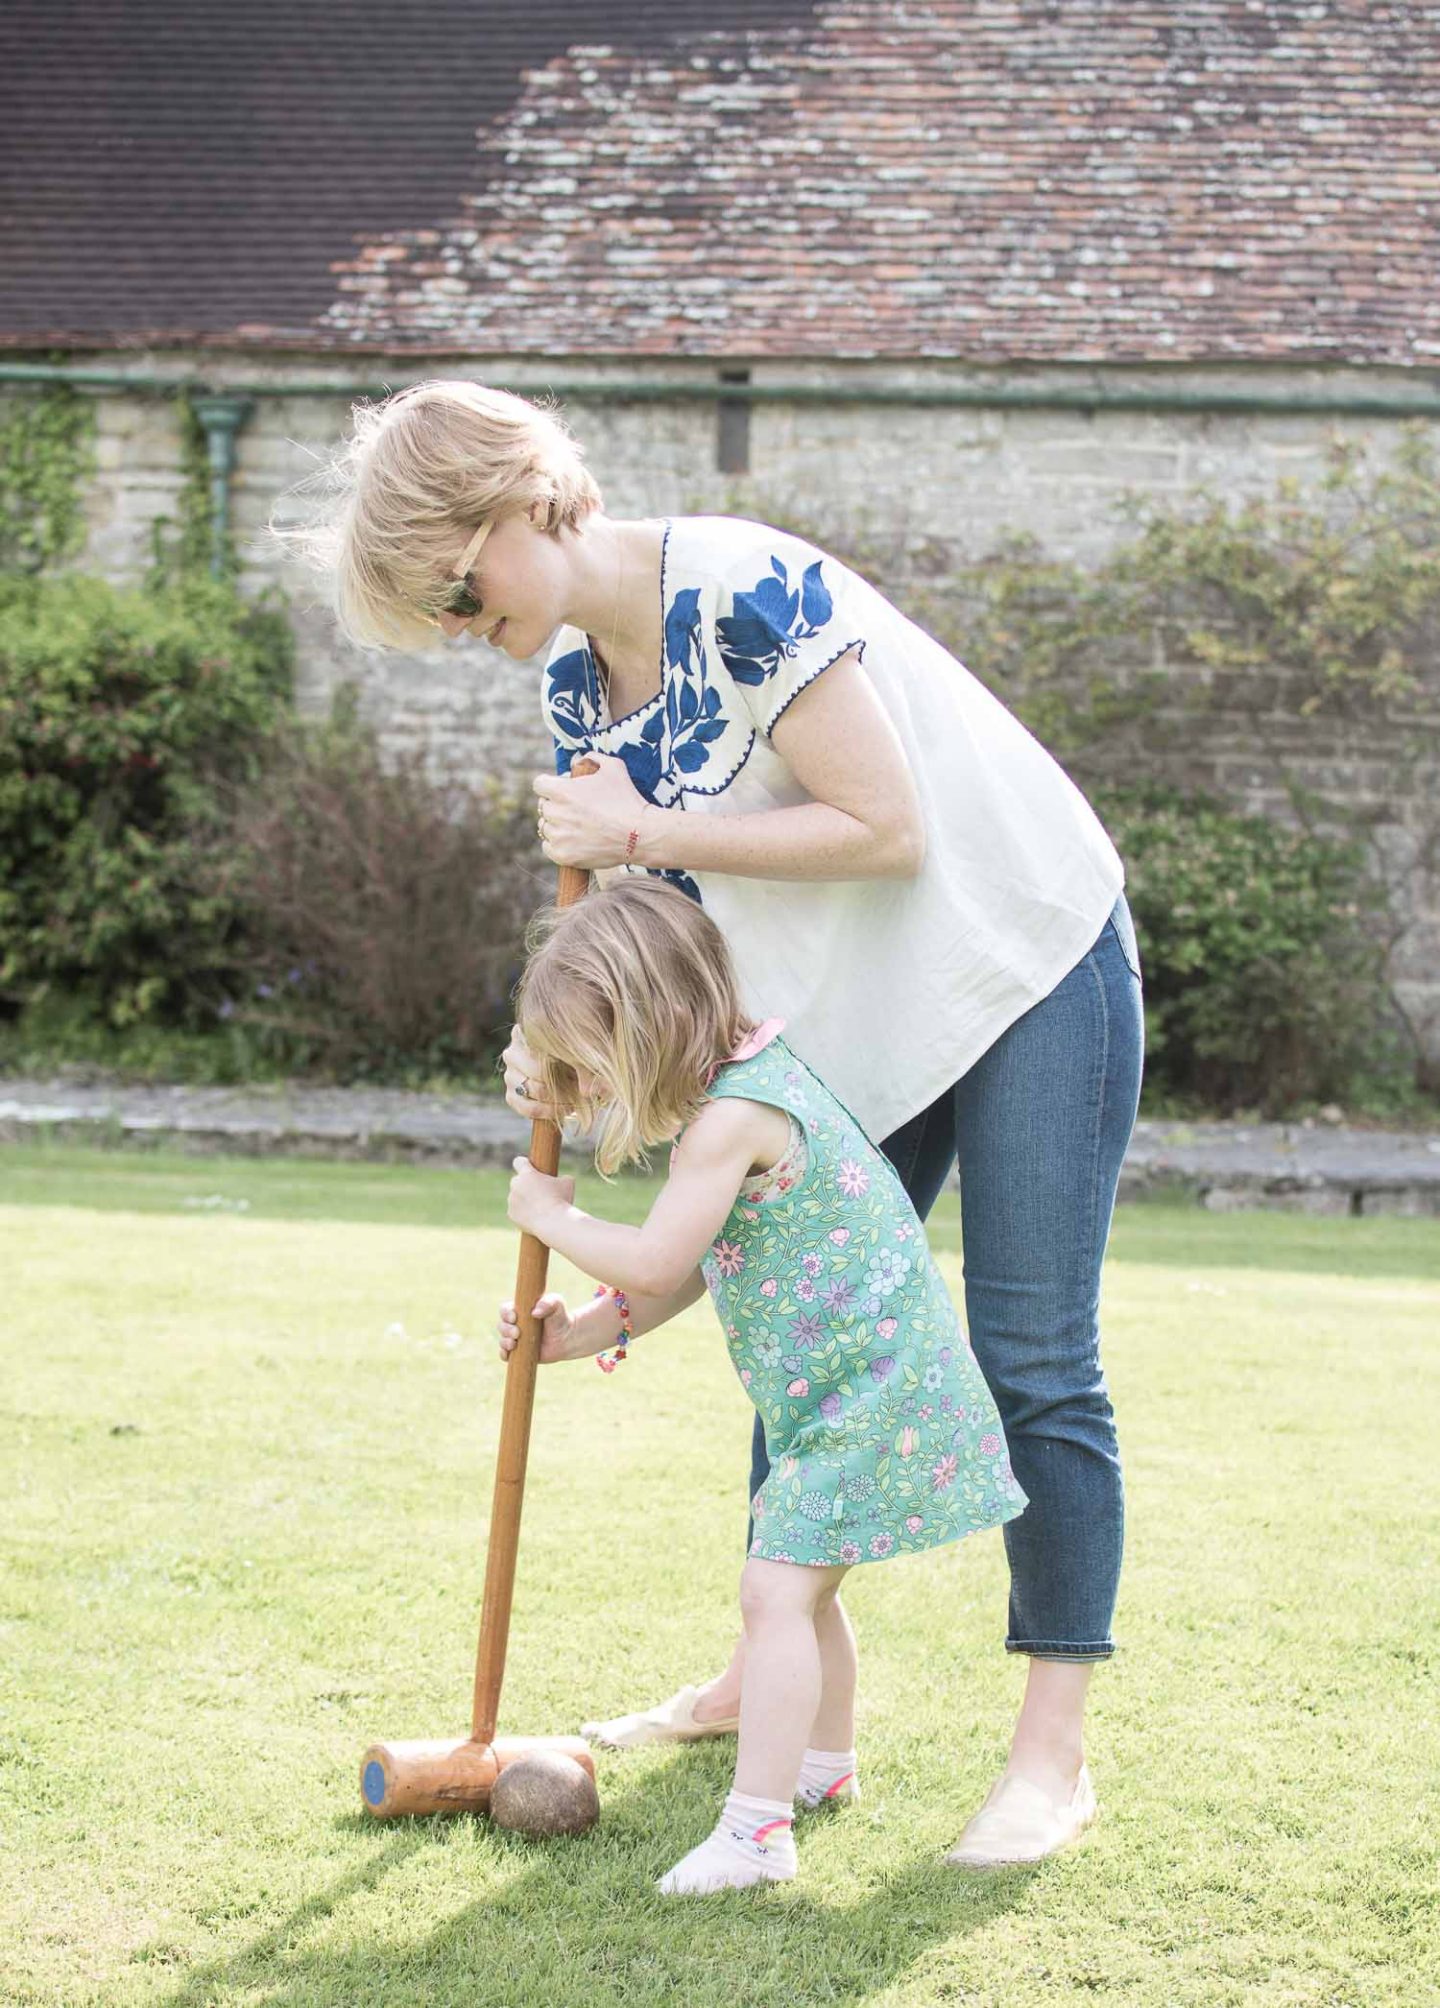 Lifestyle blogger Karen Maurice of n4mummy with her daughter Daisy playing crochet at Wootton House